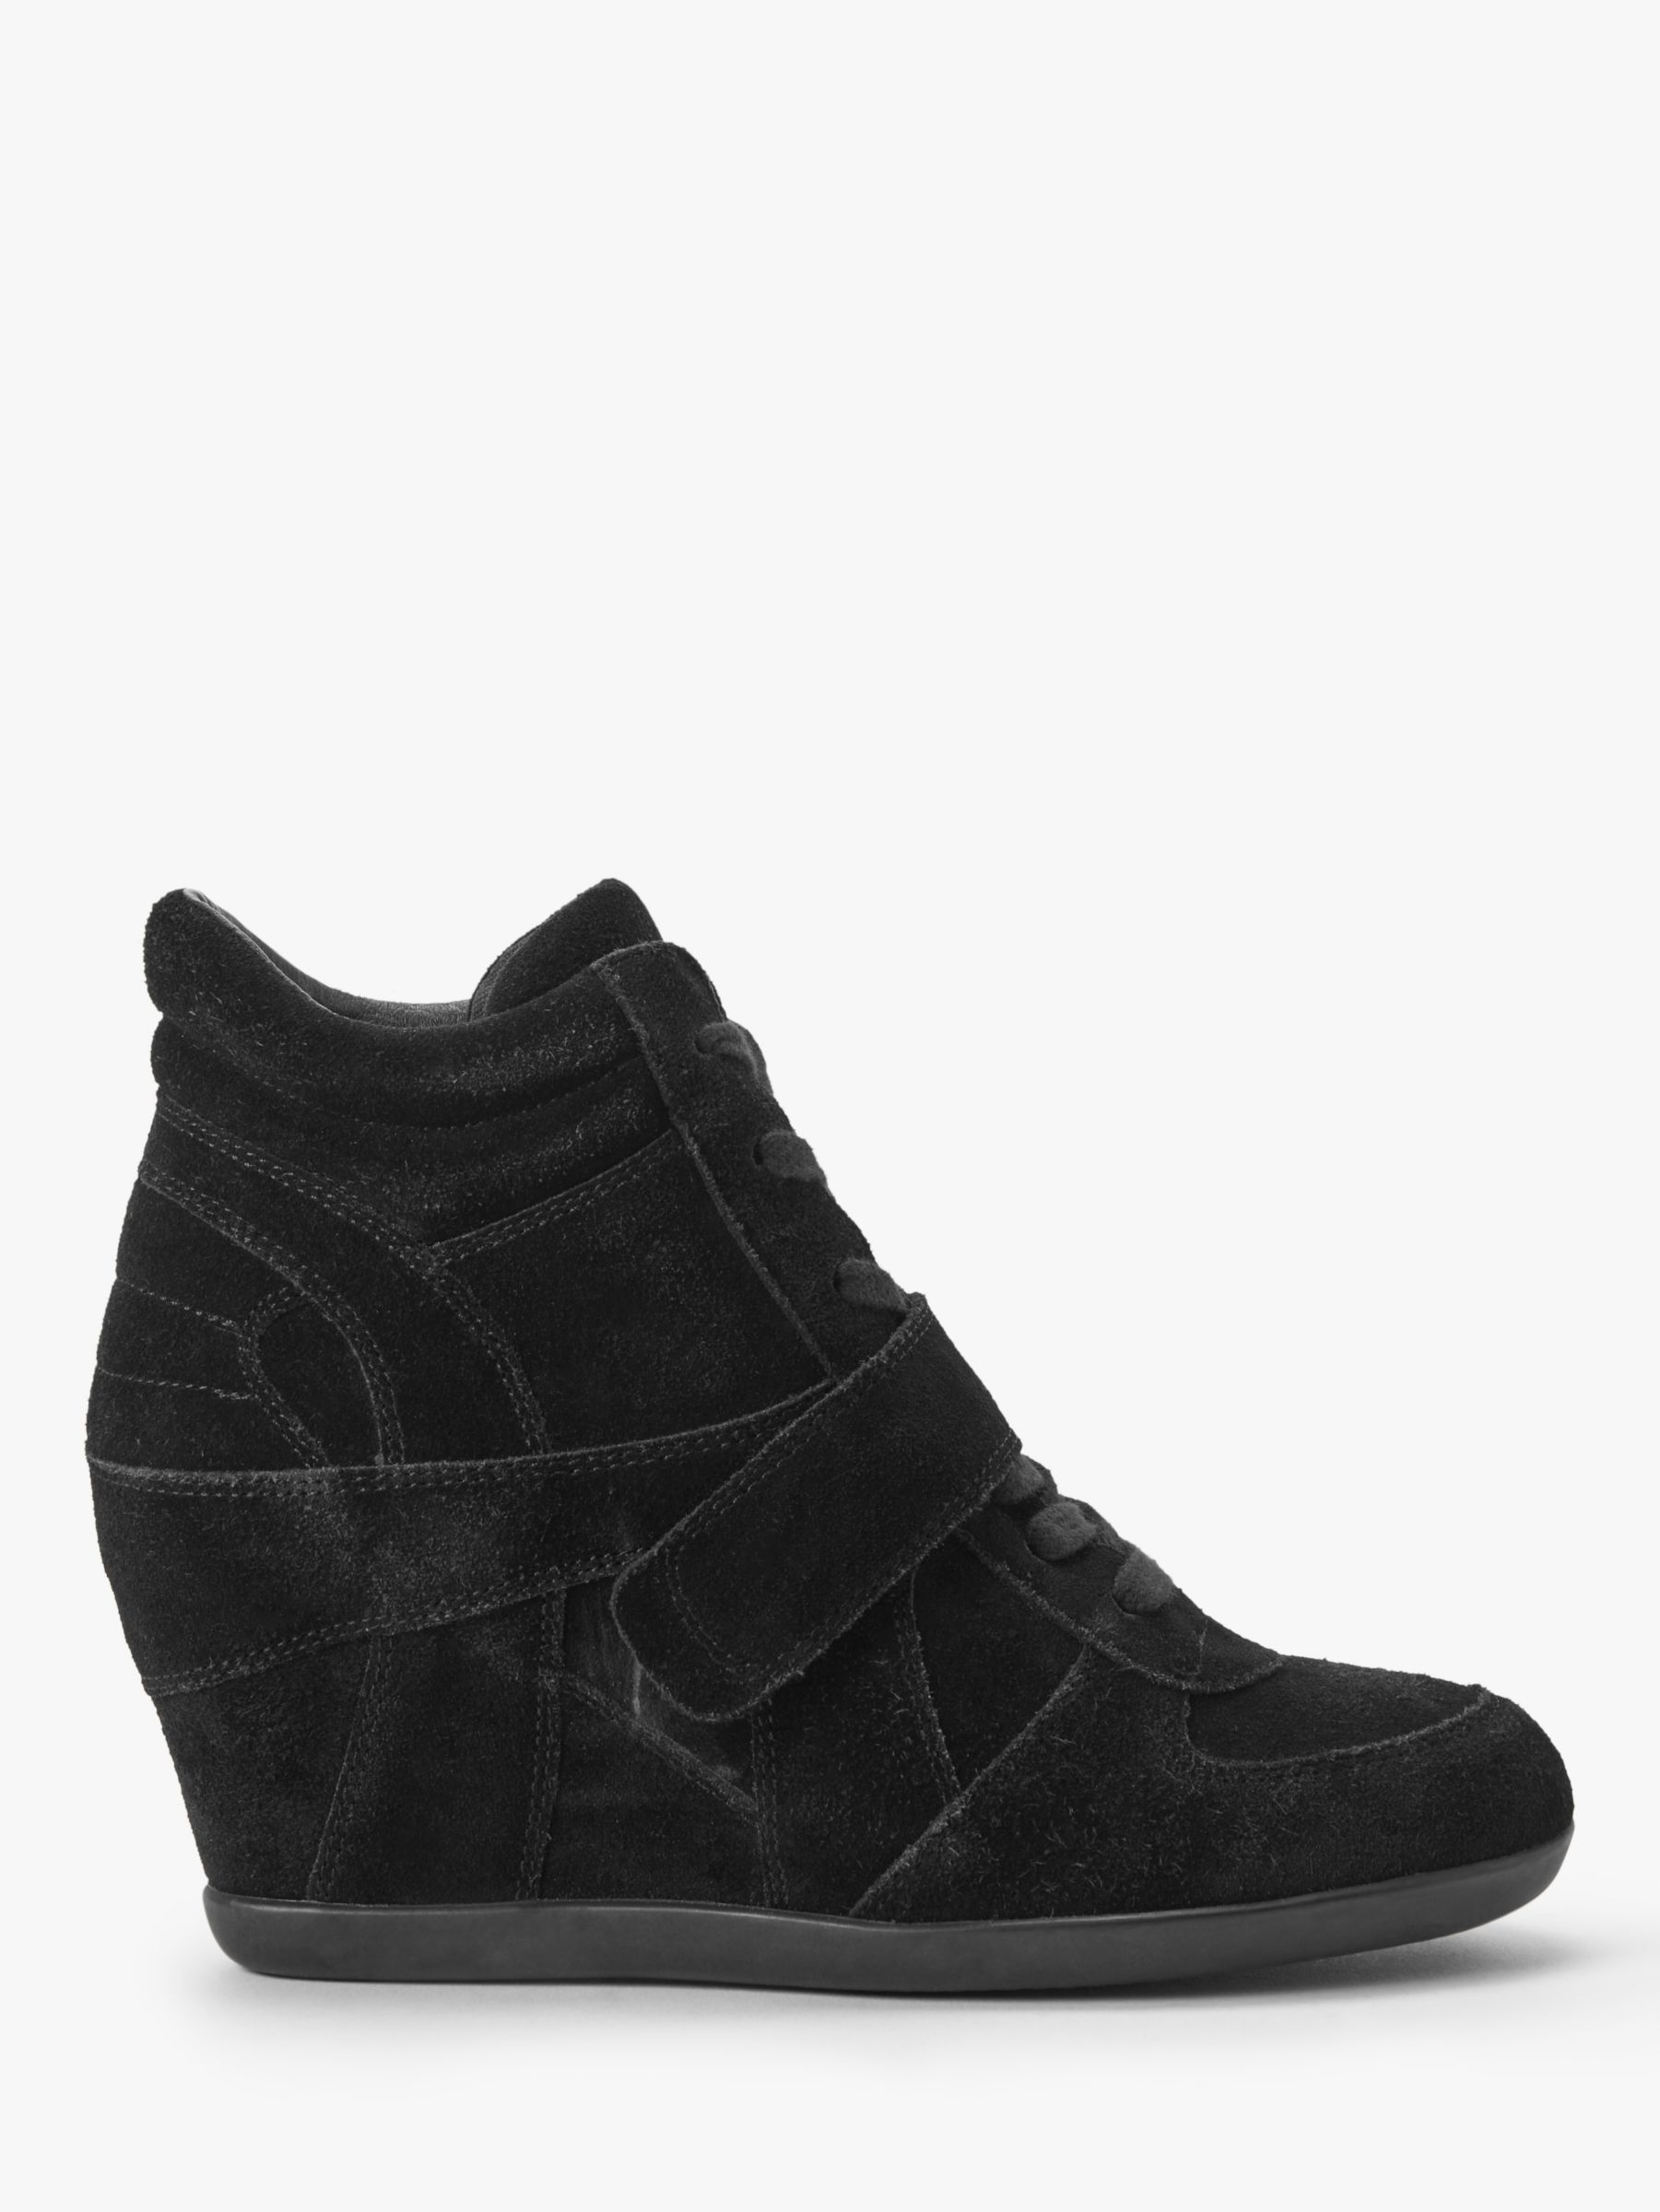 Ash Bowie Suede Wedge Trainers, Black